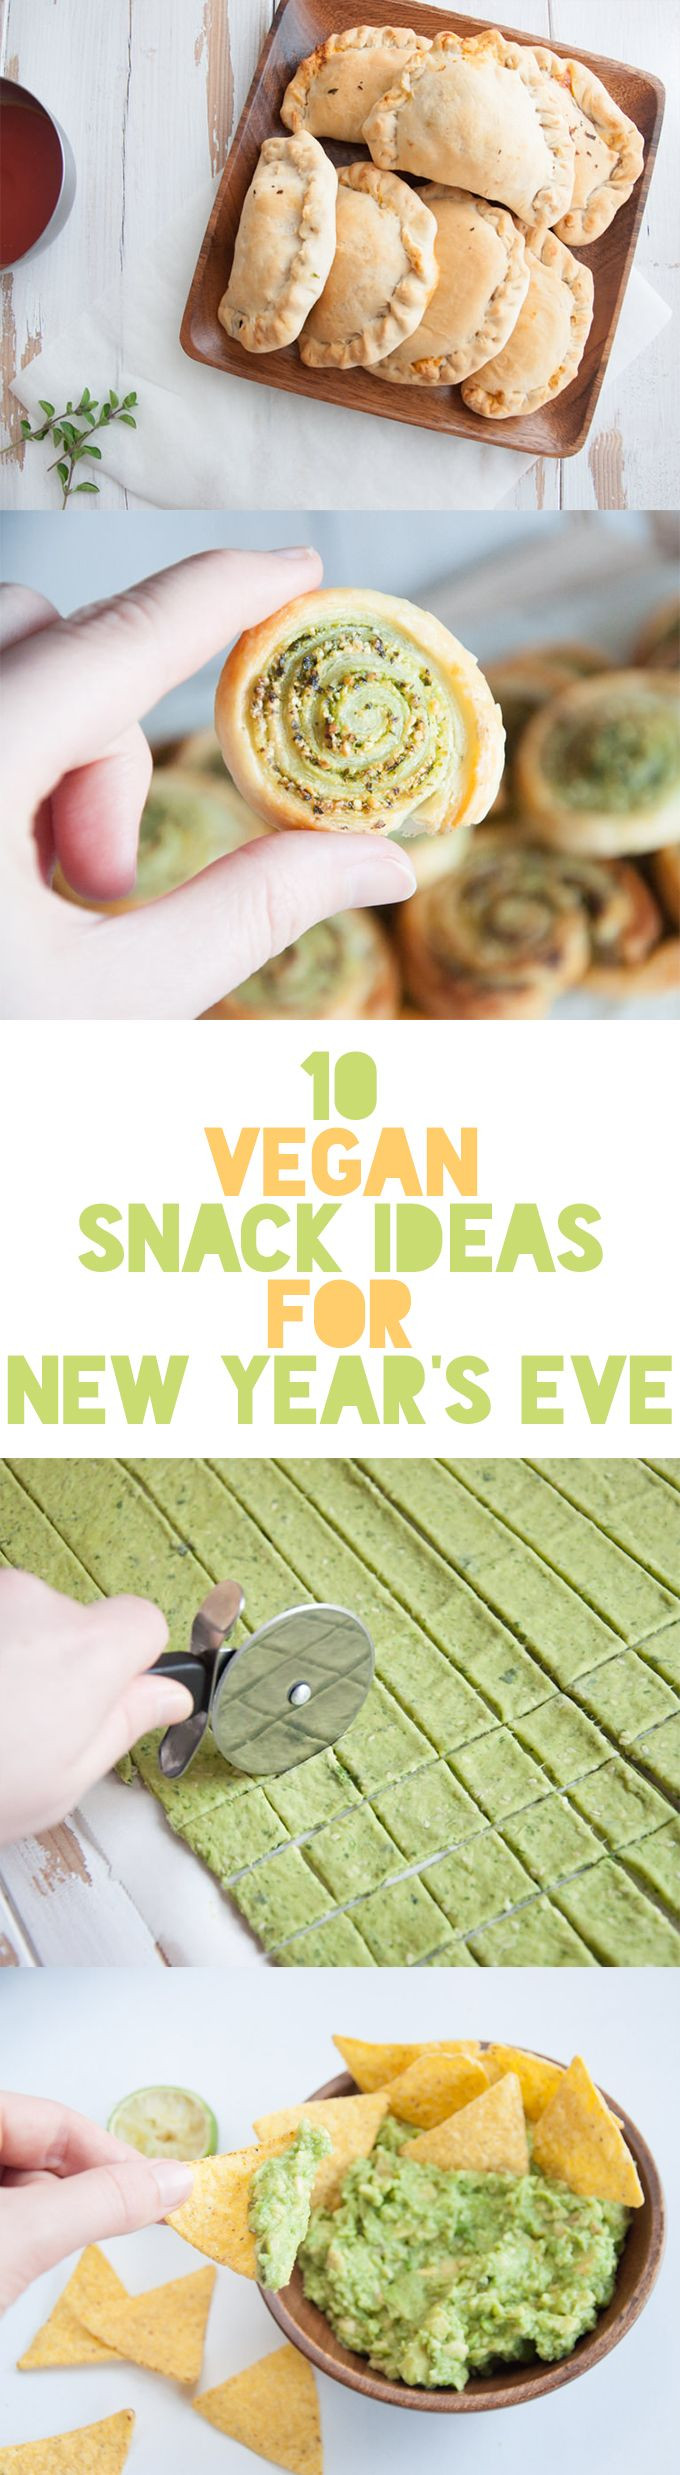 Vegan New Year'S Eve Recipes
 17 Best images about Meatless Menu New Year s on